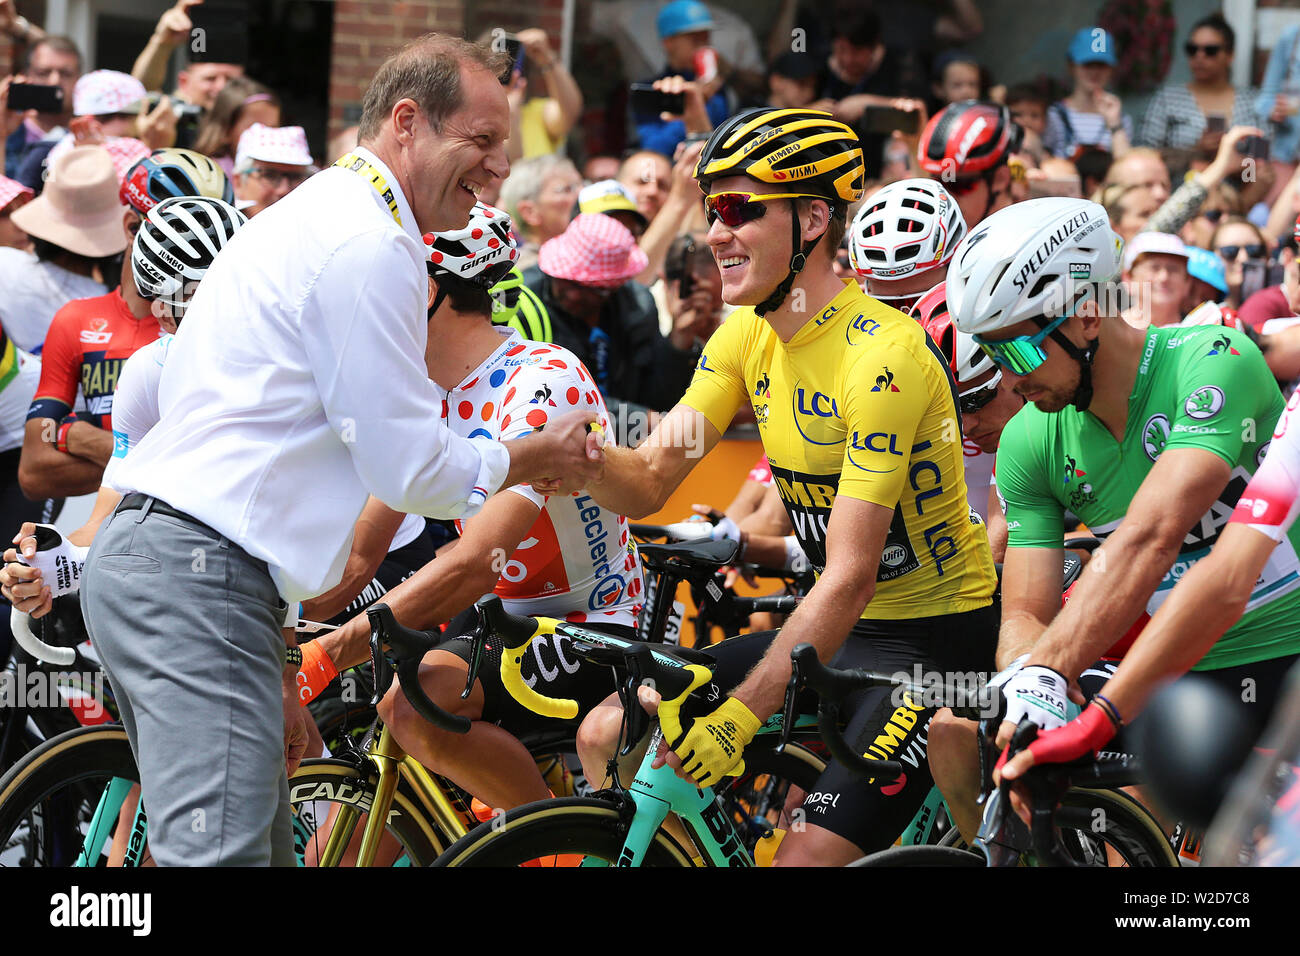 Epernay, France. 08th July, 2019. Epernay - 8-07-2019, cycling, Stage 3, etappe 3 Binche-Epernay, Christian Prudhomme shakes Mike Teunissen's hand Credit: Pro Shots/Alamy Live News Stock Photo